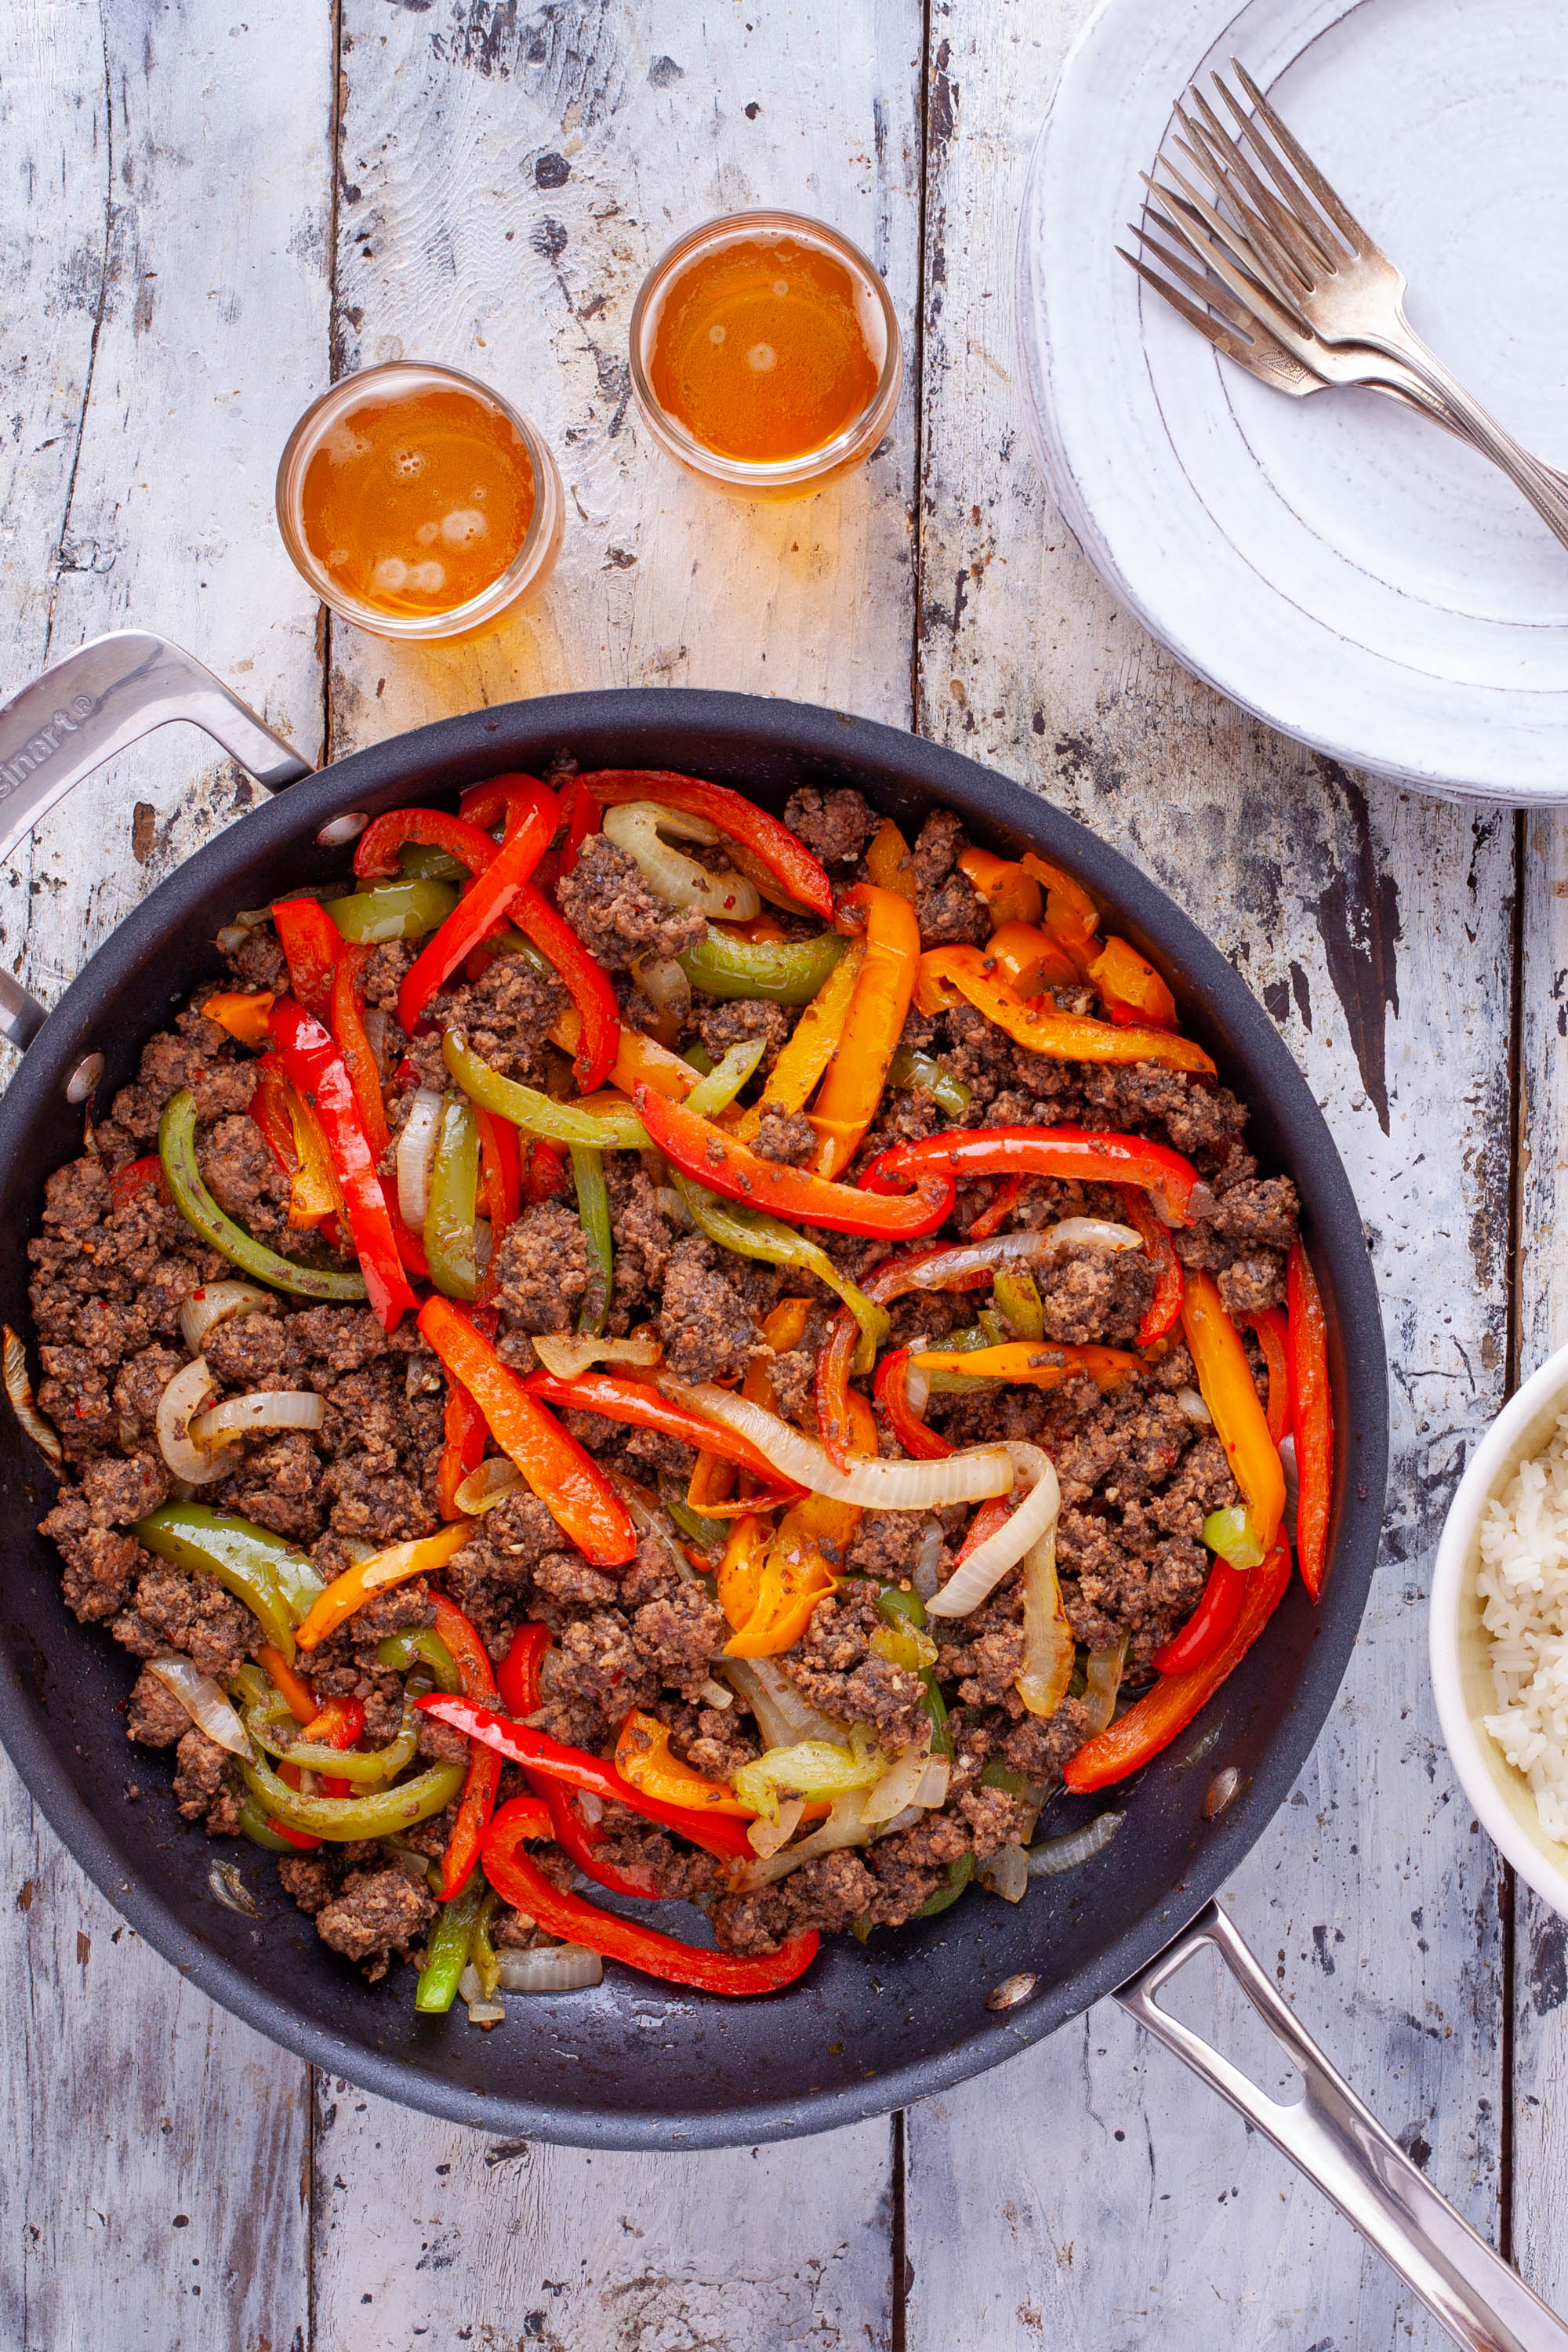 Fajitas Recipe with Ground Beef for Easy Weeknight Dinner - Eating Richly